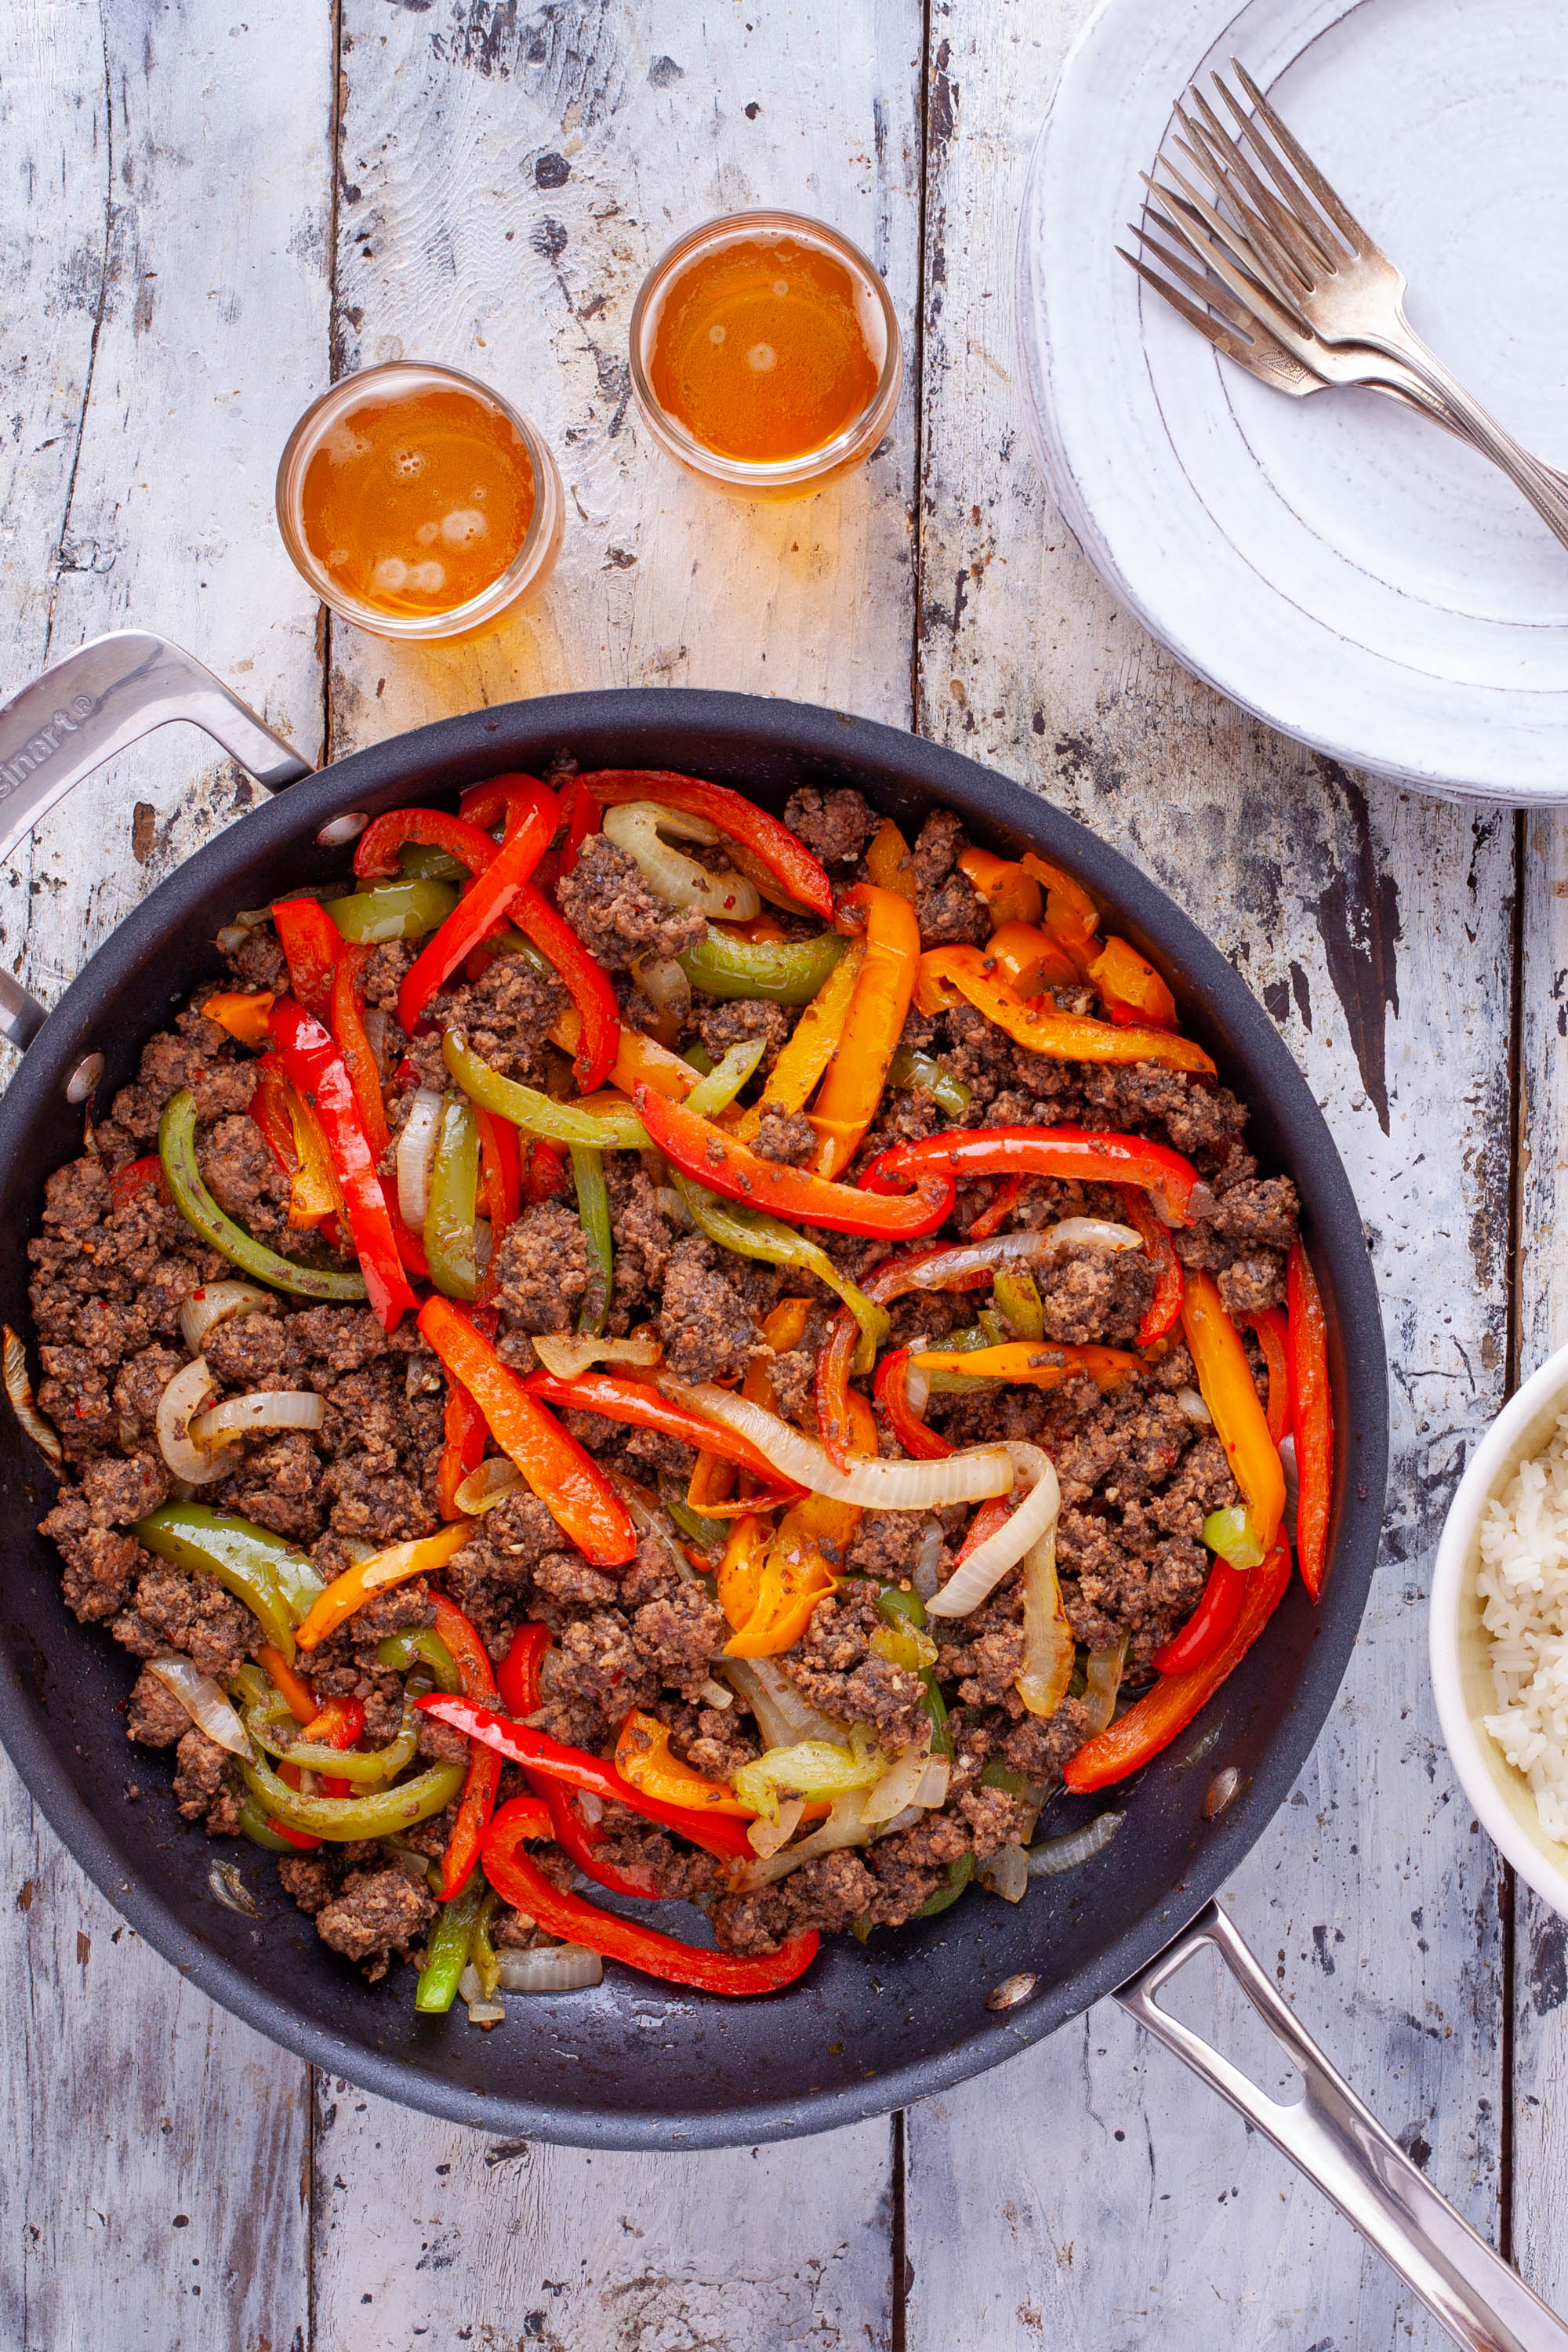 Fajitas Recipe with Ground Beef for Easy Weeknight Dinner - Eating Richly